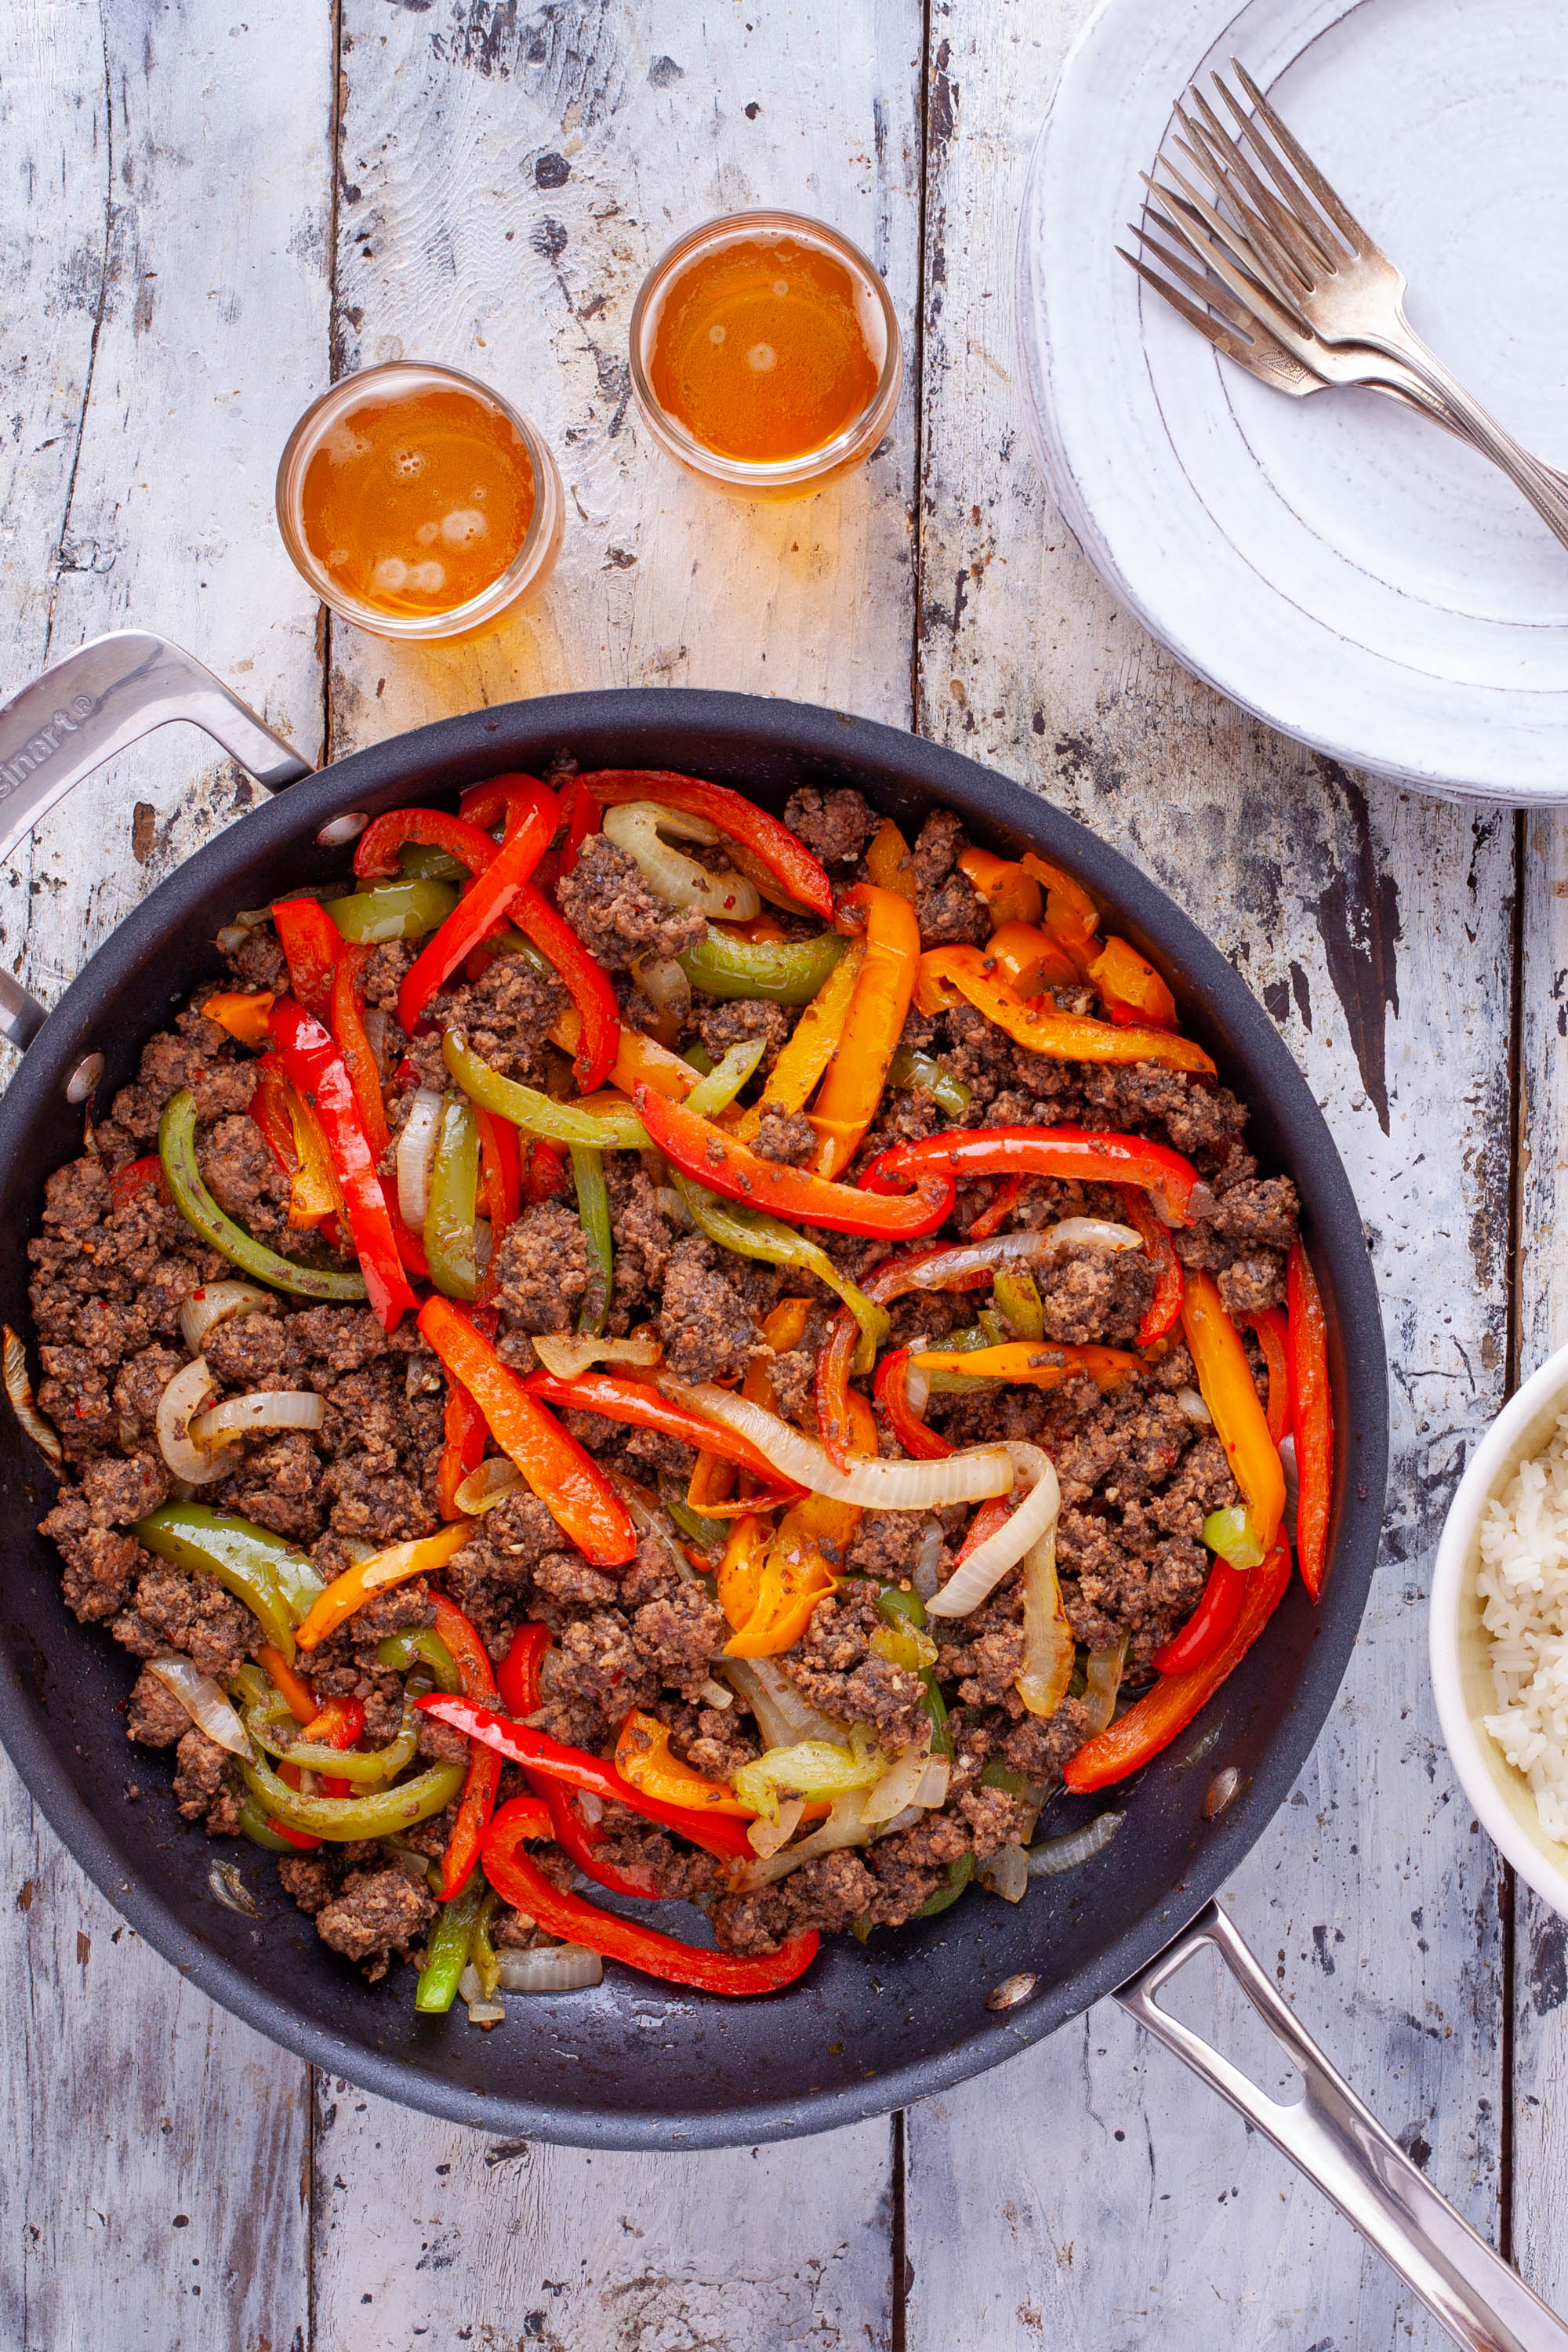 Fajitas Recipe with Ground Beef for Easy Weeknight Dinner - Eating Richly